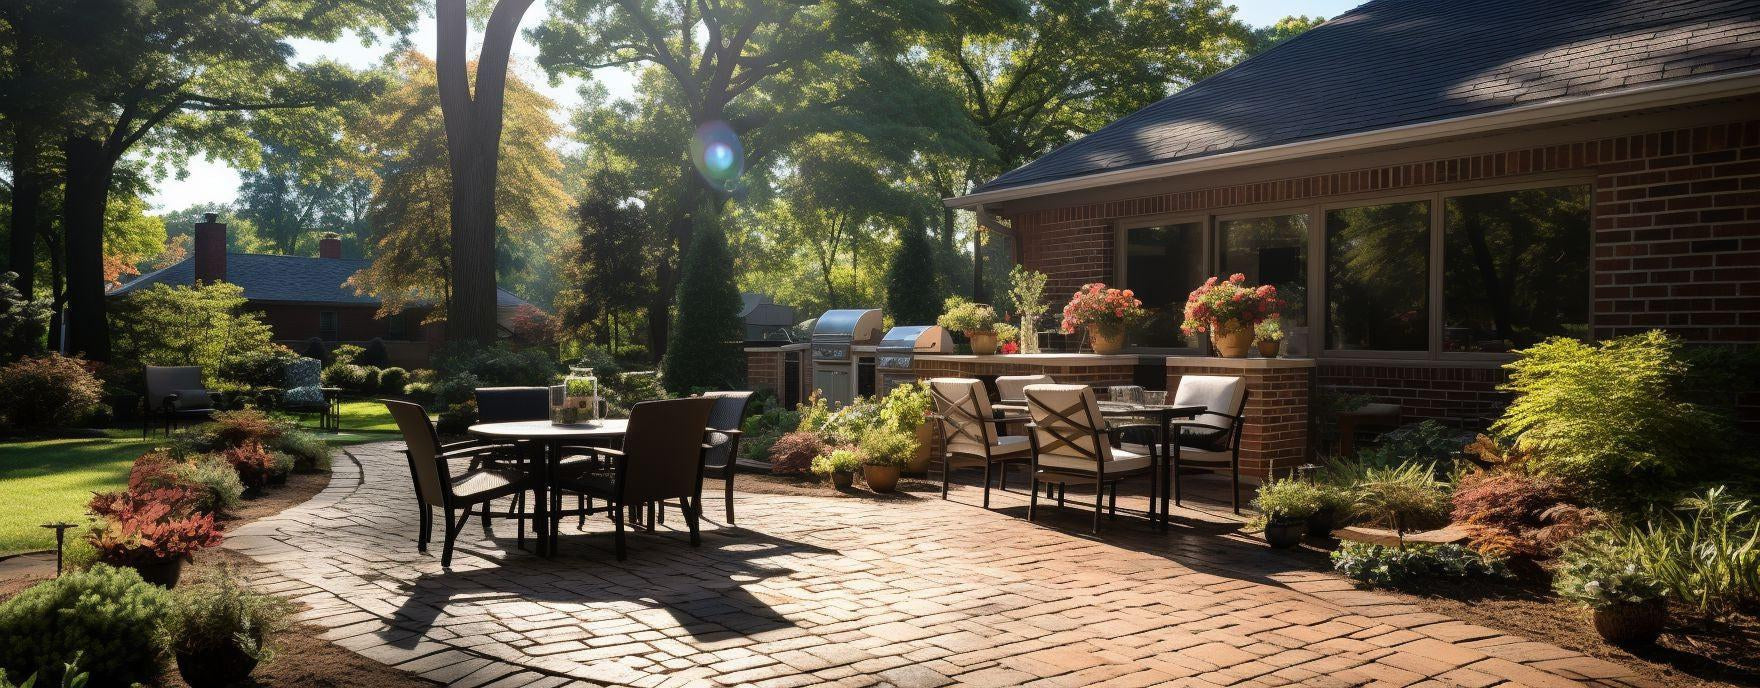 Paving the Way: 7 Brick Paver FAQs with a Twist